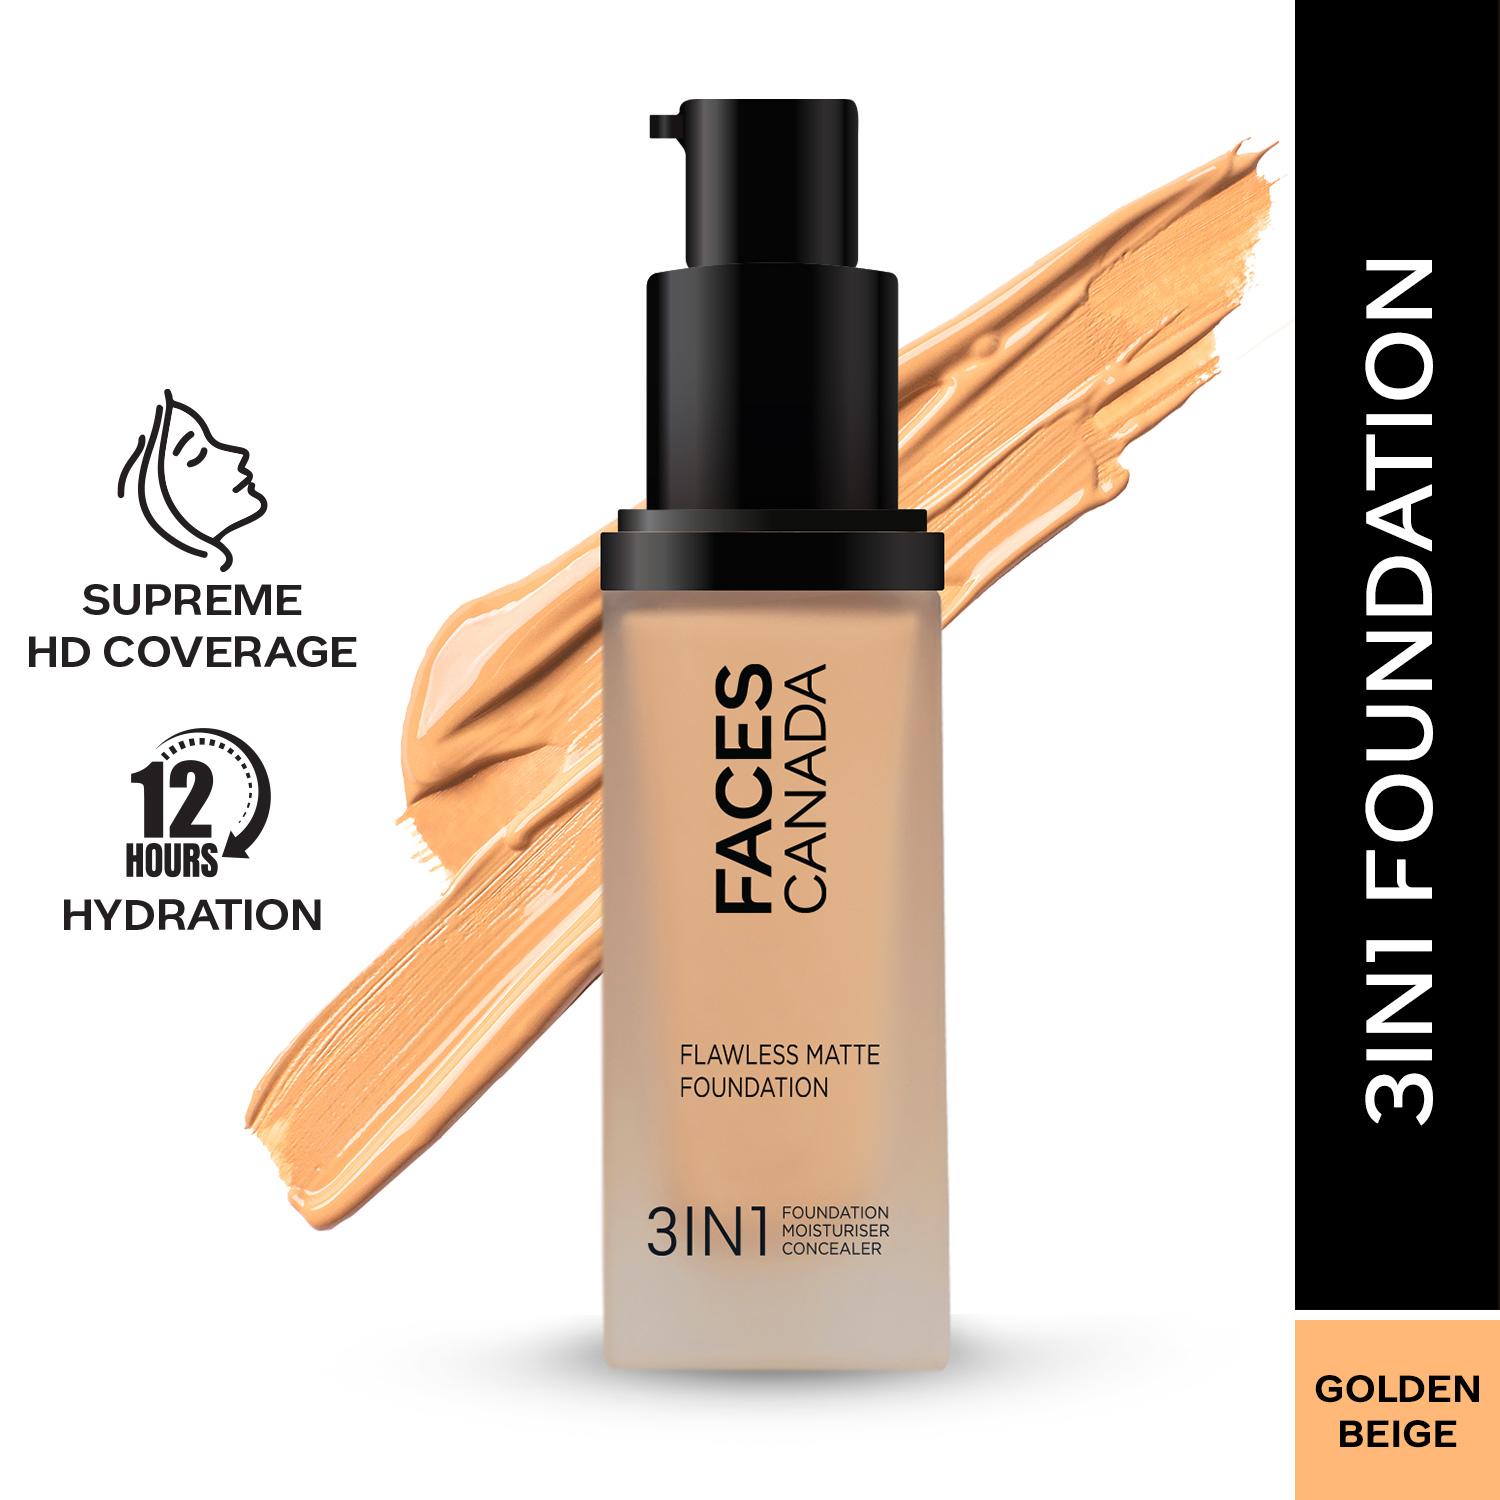 Faces Canada | Faces Canada Flawless Matte Foundation - Golden Beige 032, 12 HR Hydration + SPF 18 (30 ml)